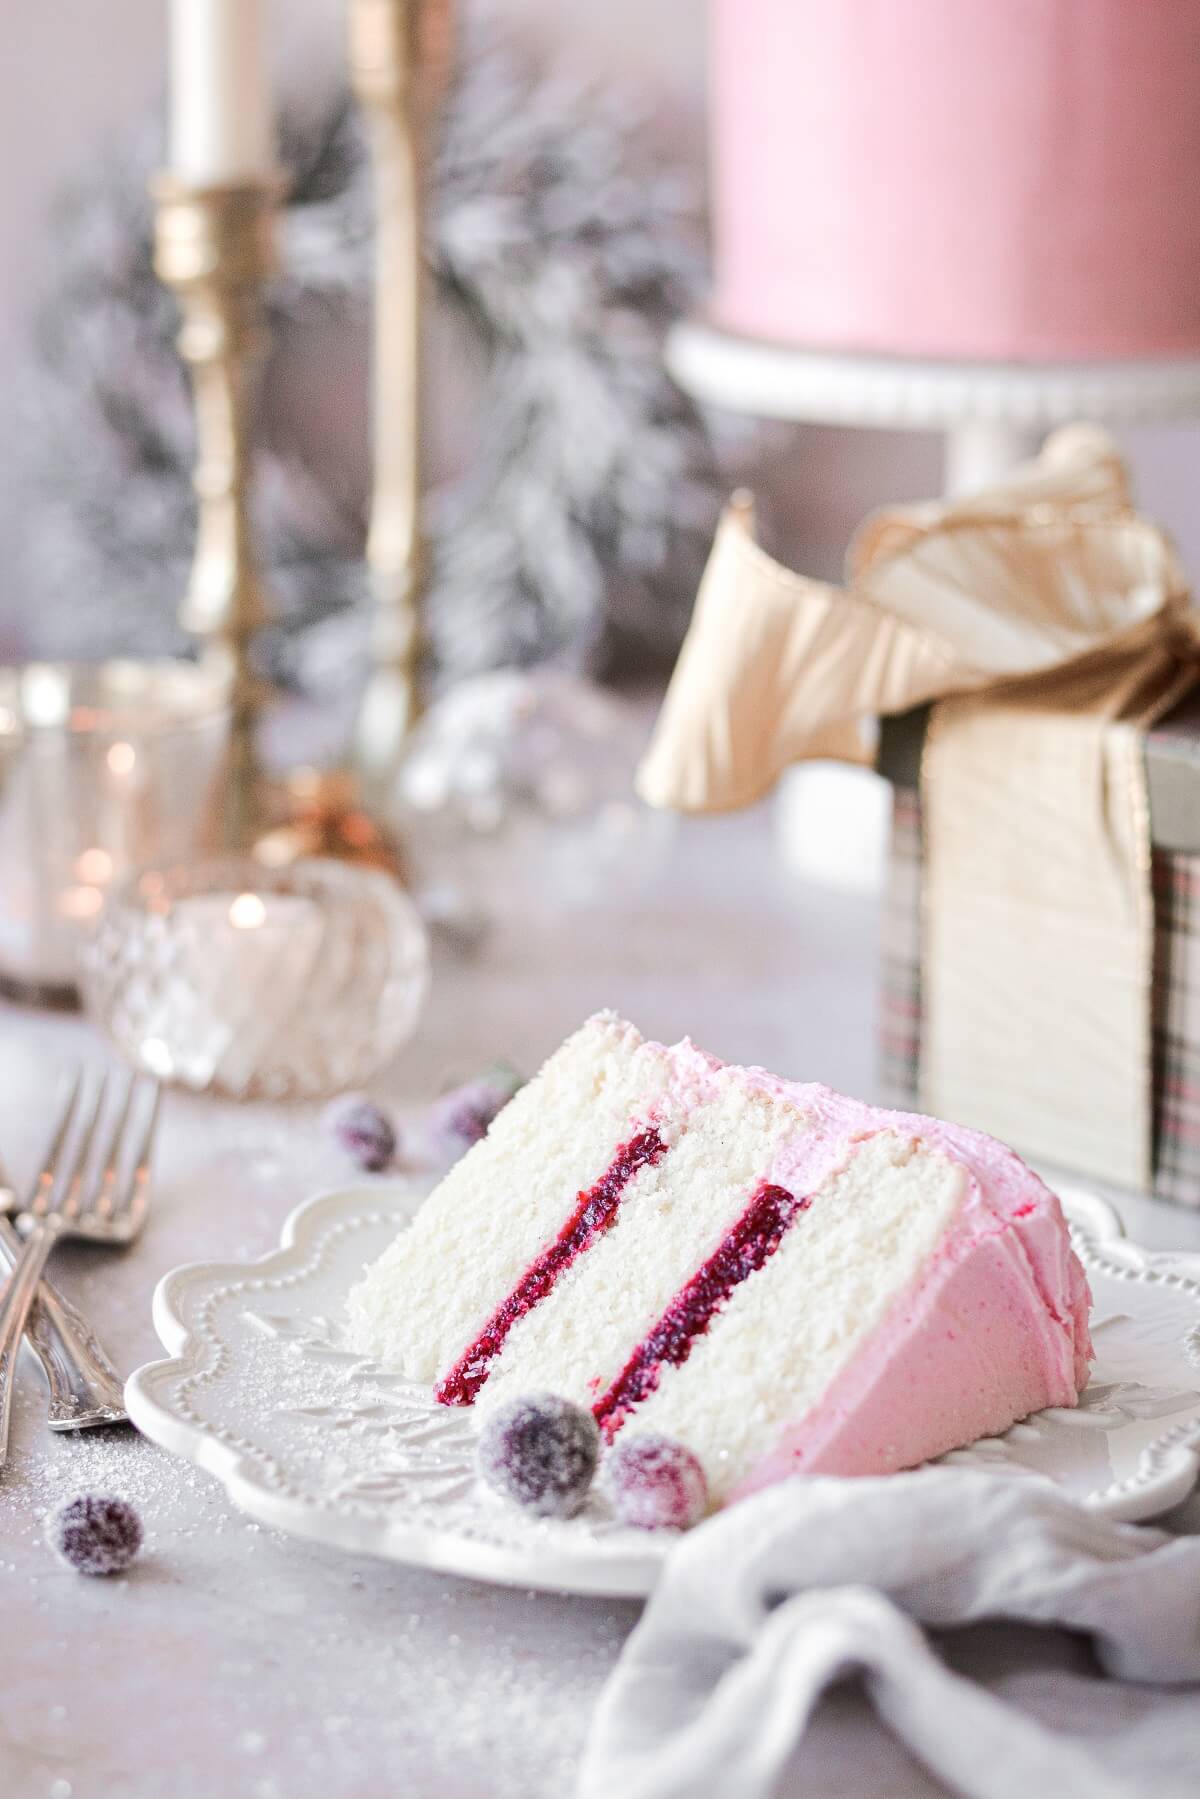 A slice of cranberry cake with presents and candles in the background.